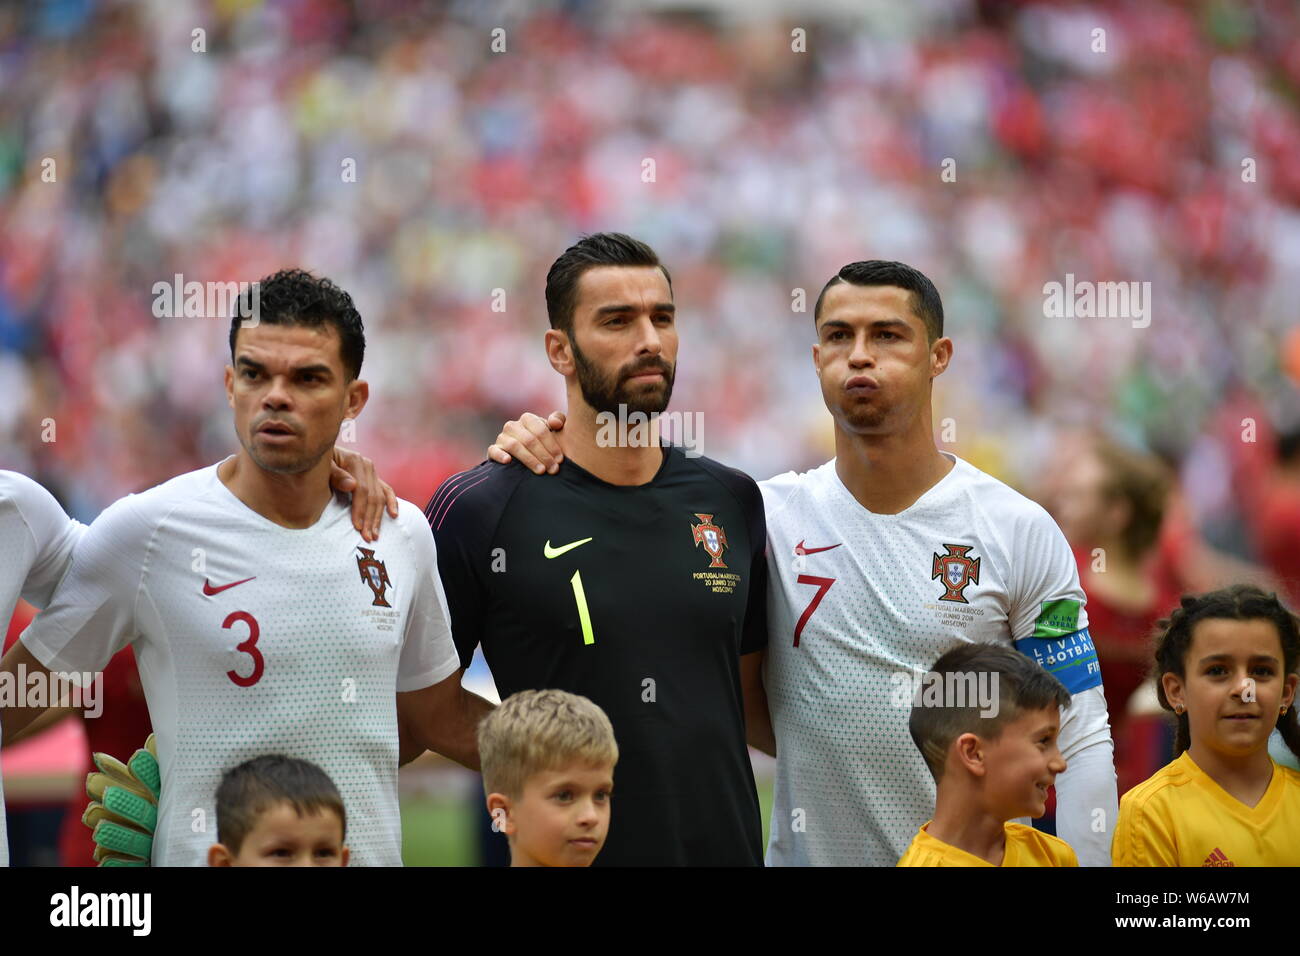 (From left) Pepe, Rui Patricio and Cristiano Ronaldo of Portugal pose before competing against Morocco during the 2018 FIFA World Cup in Moscow, Russi Stock Photo